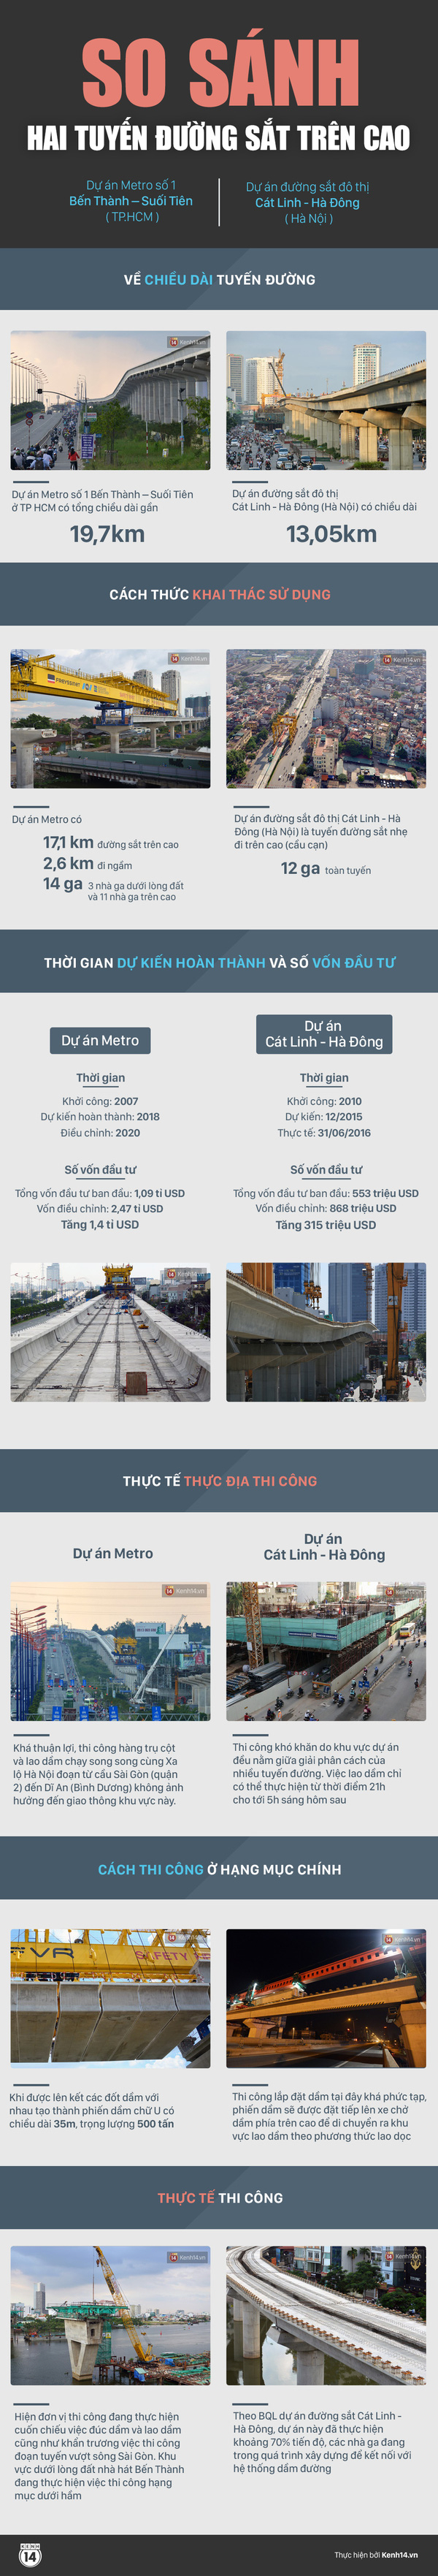 Infographic: Tuyến đường sắt tr&ecirc;n cao tại H&agrave; Nội v&agrave; S&agrave;i G&ograve;n c&oacute; g&igrave; kh&aacute;c nhau?